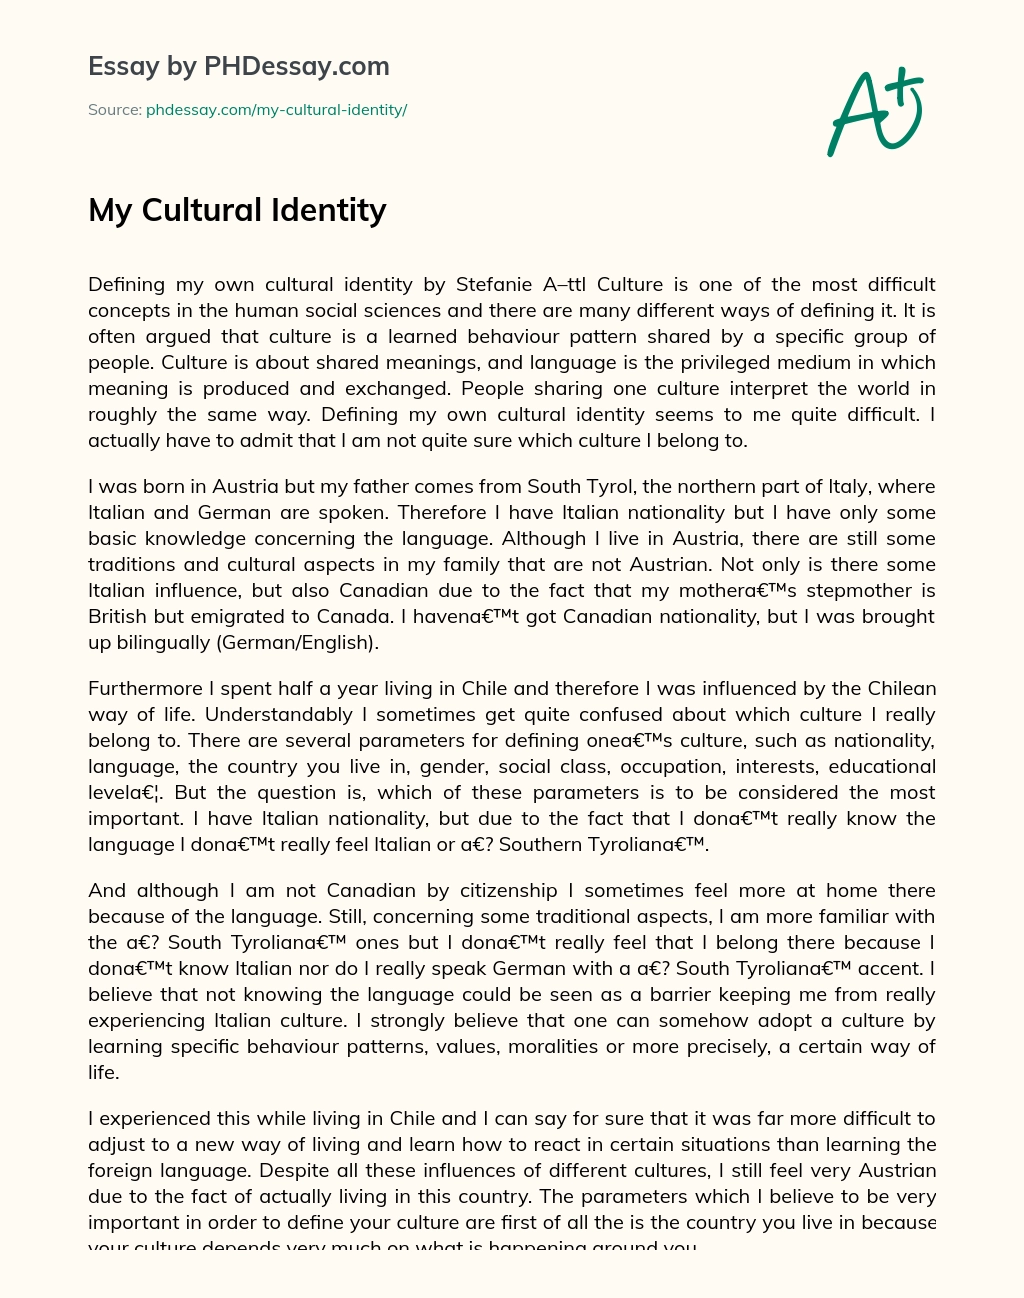 example of cultural identity essay